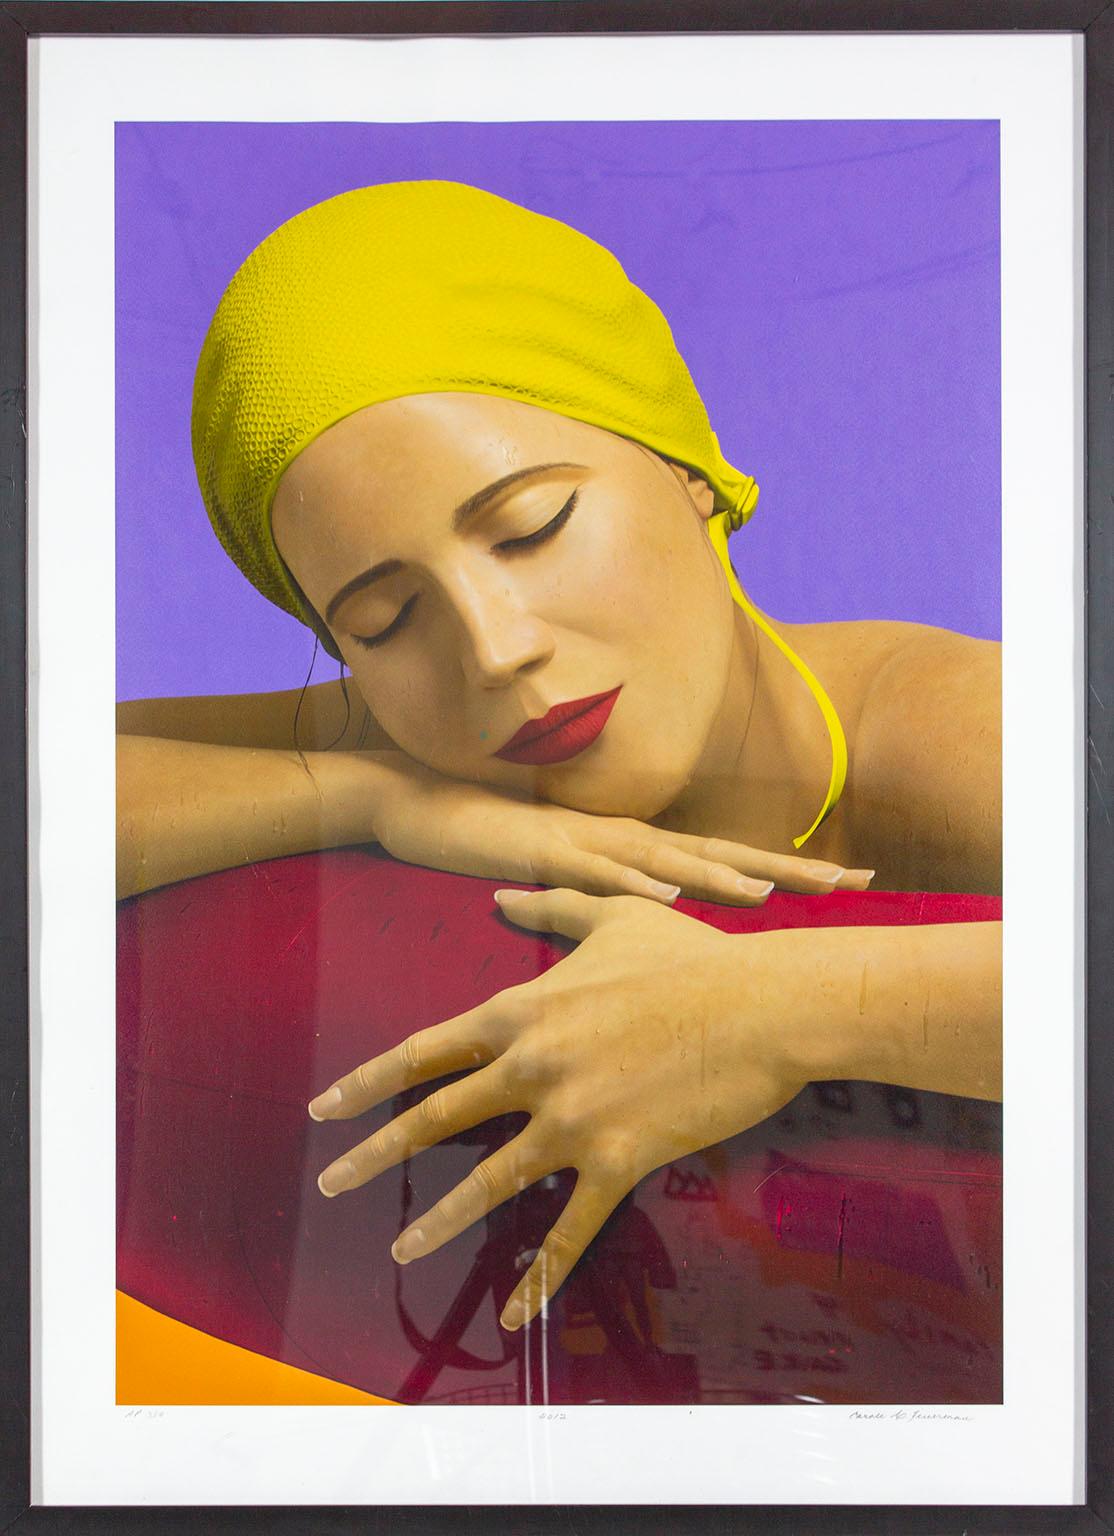 Carole Feuerman Portrait Print - Artist proof "Serena with Yellow Cap" mixed media print by Carole A. Feuerman